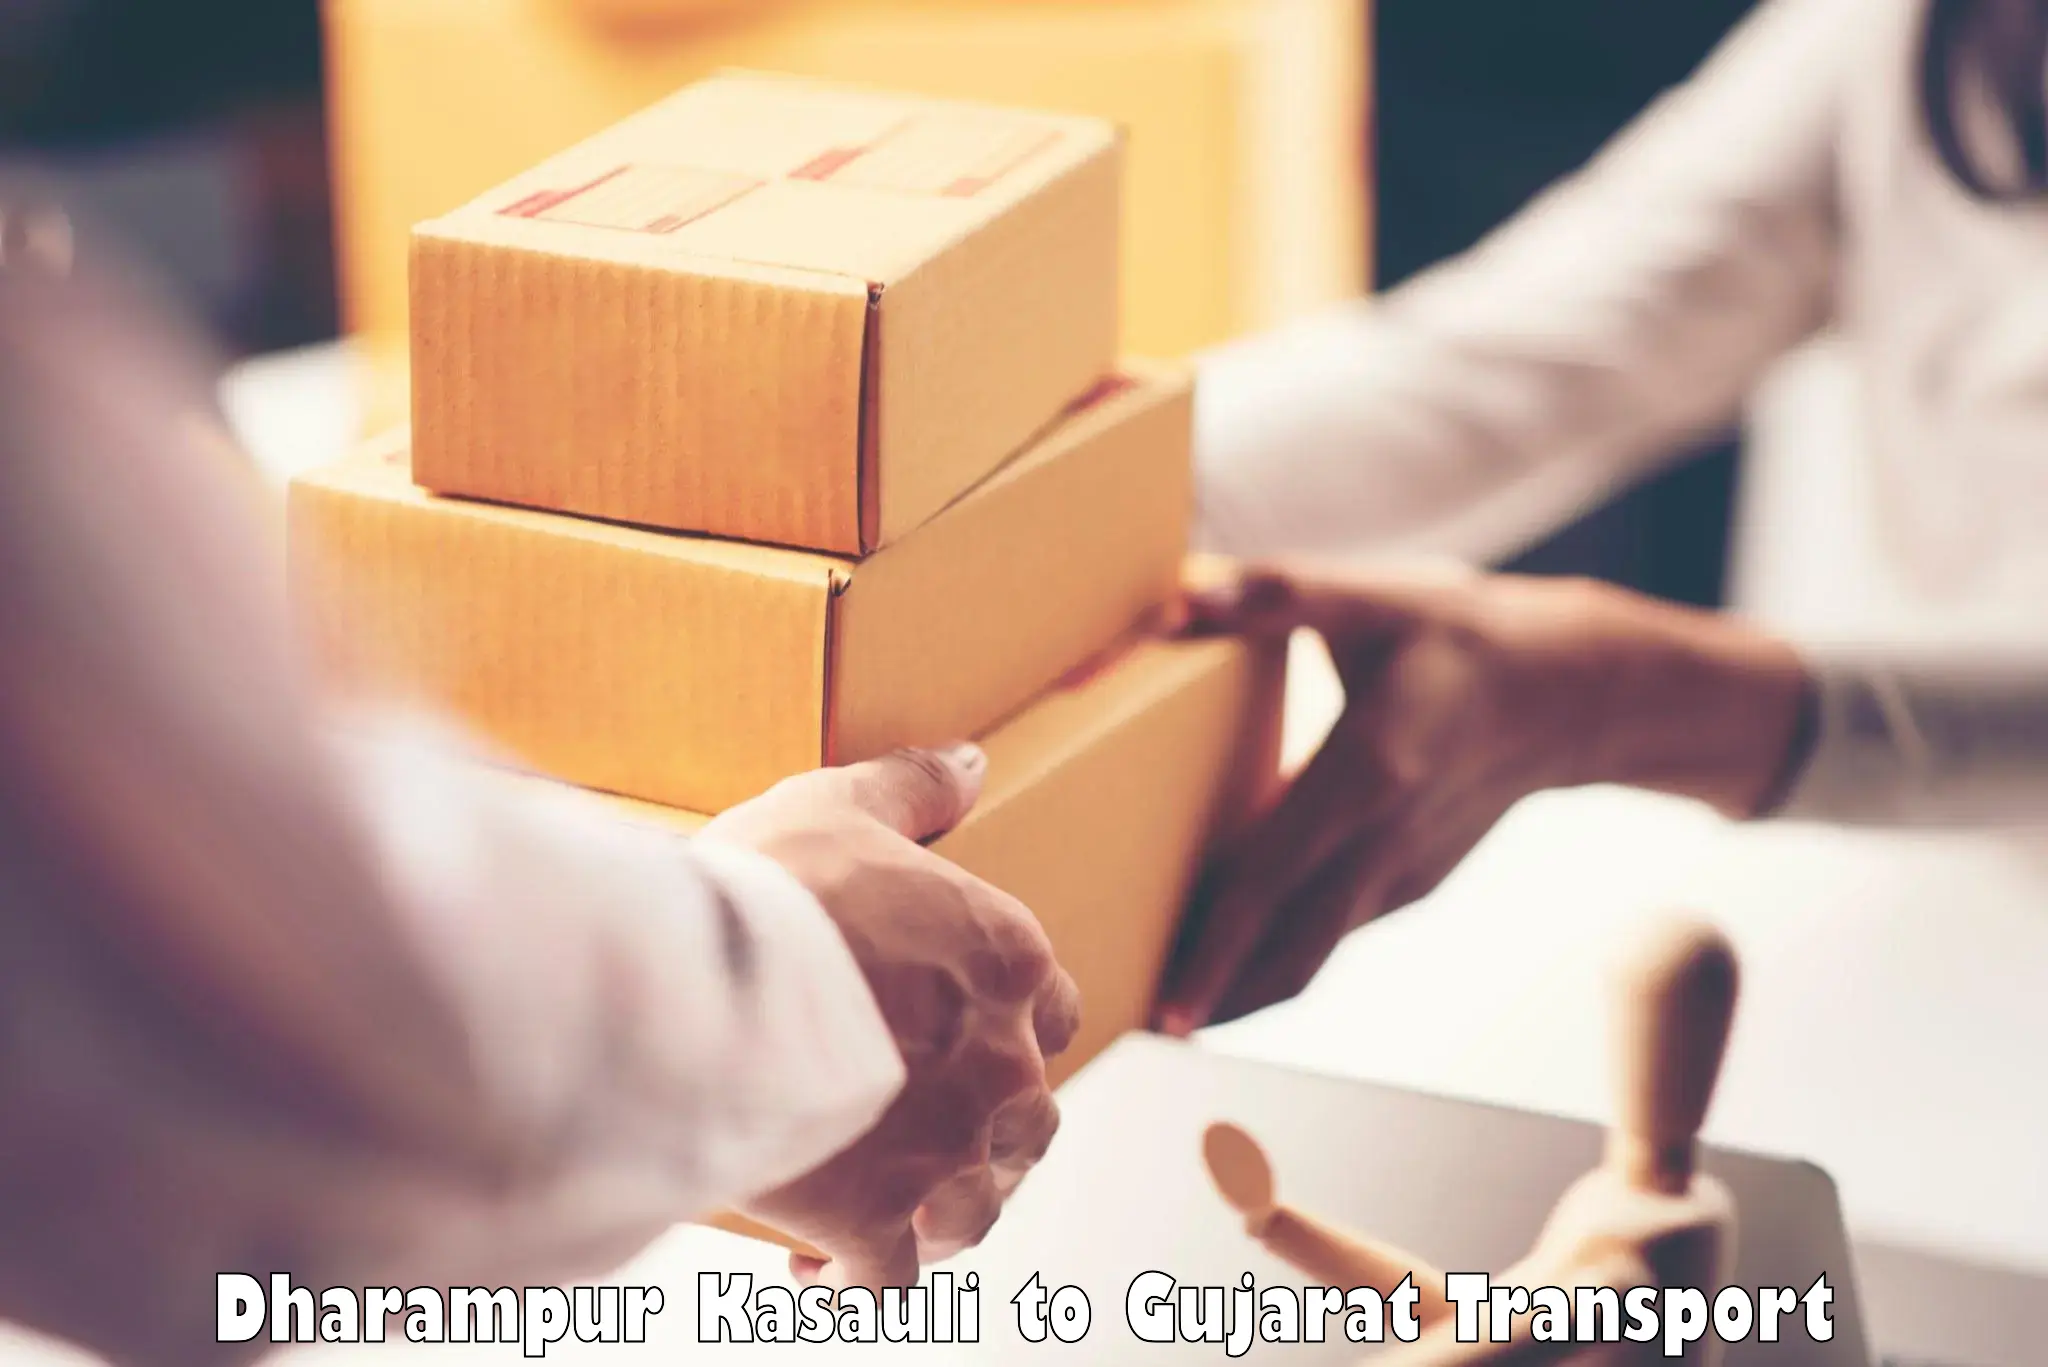 Container transport service Dharampur Kasauli to Palanpur